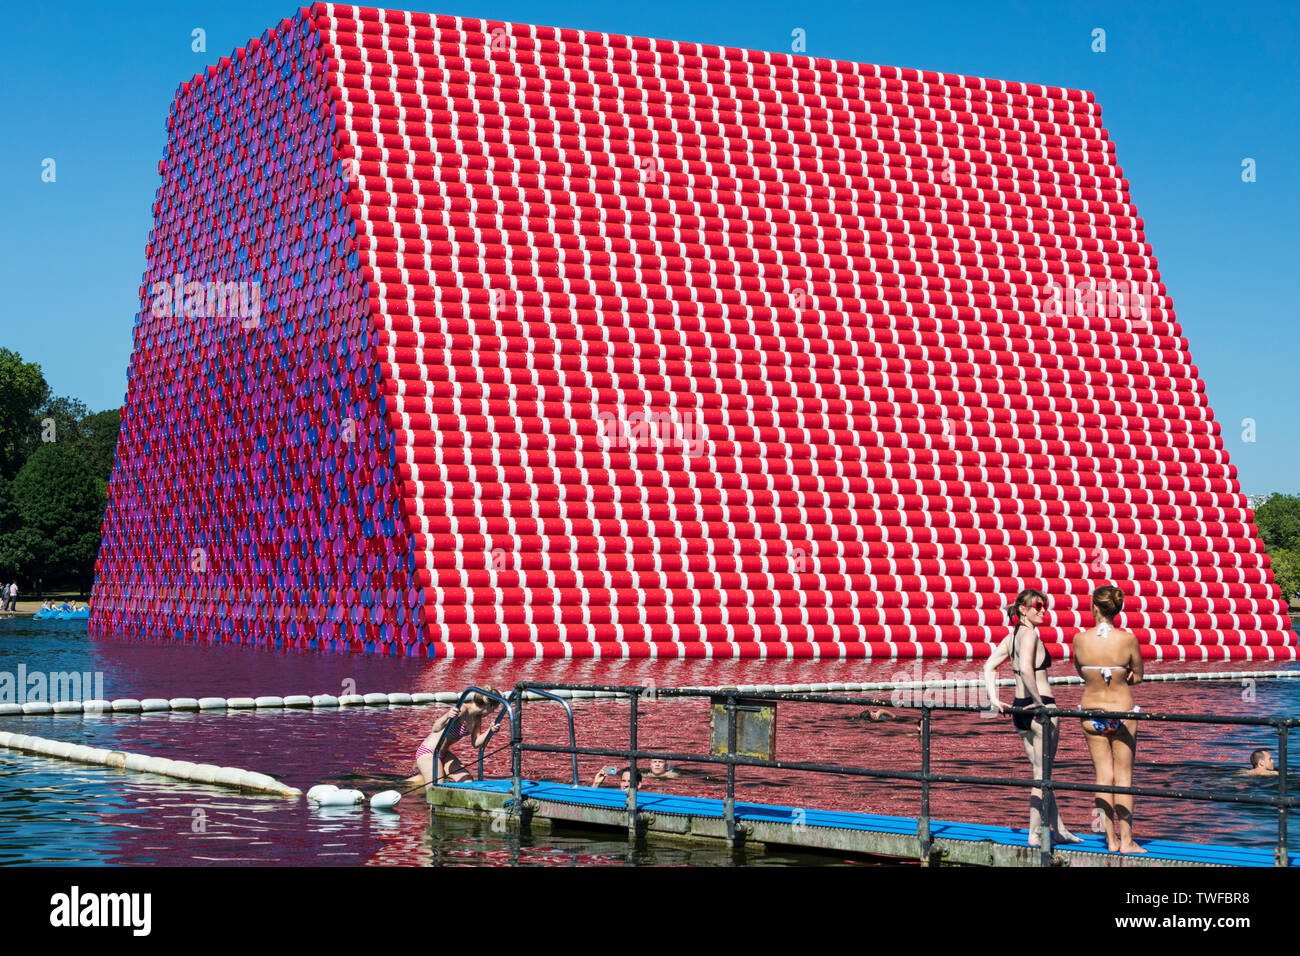 Outdoor swimming at the Serpentine Lake in Hyde Park with The London Mastaba art installation by Christo and Jeanne-Claude in the background. Stock Photo